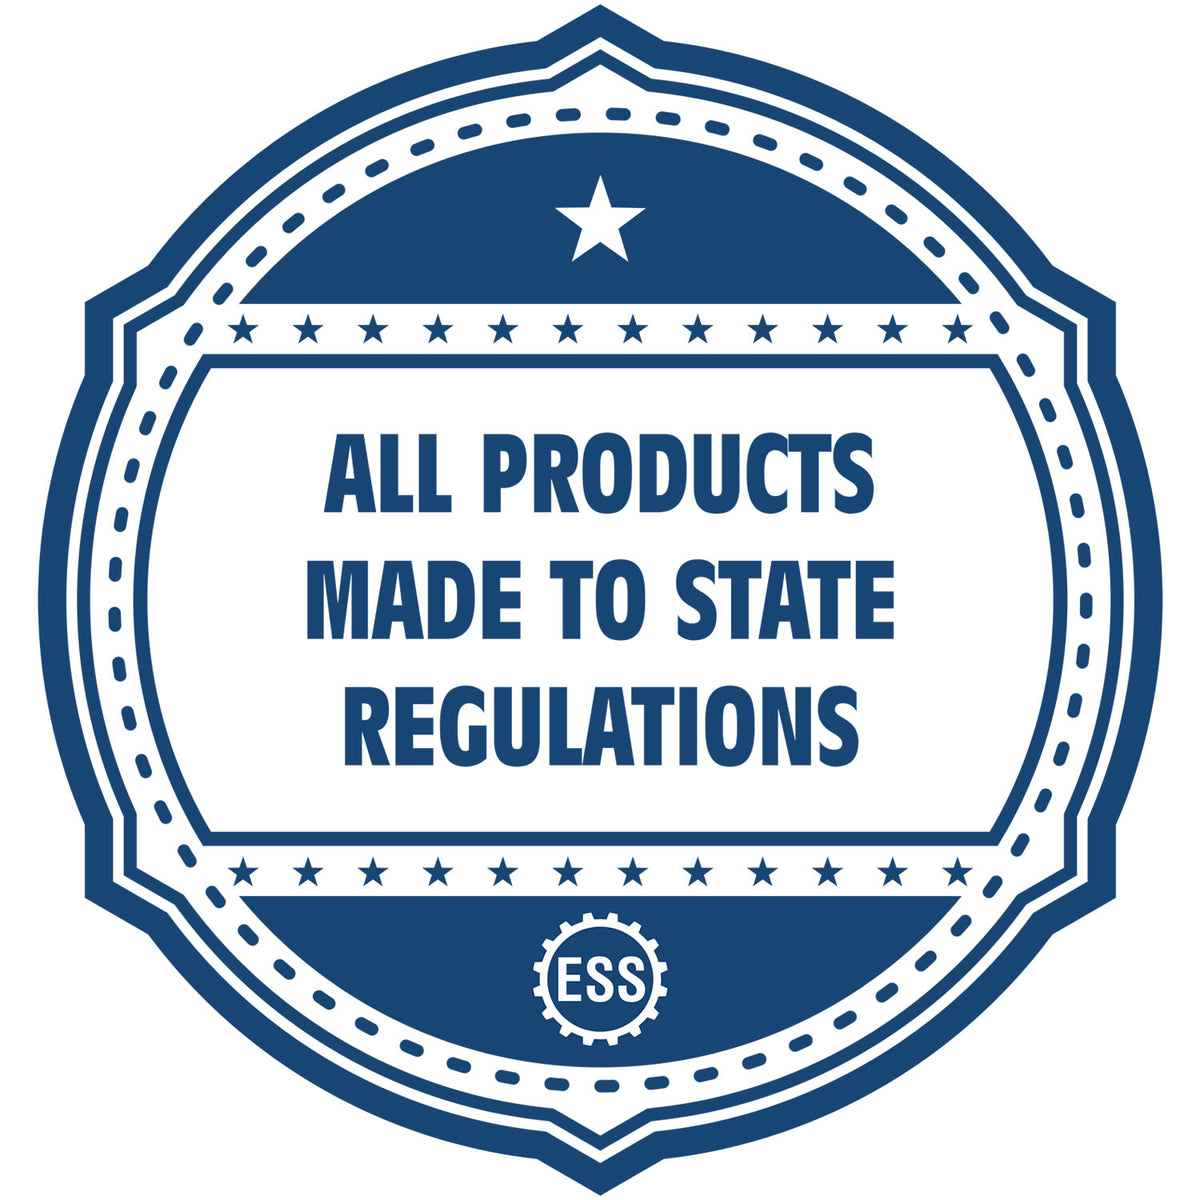 An icon or badge element for the PSI Indiana Notary Stamp showing that this product is made in compliance with state regulations.